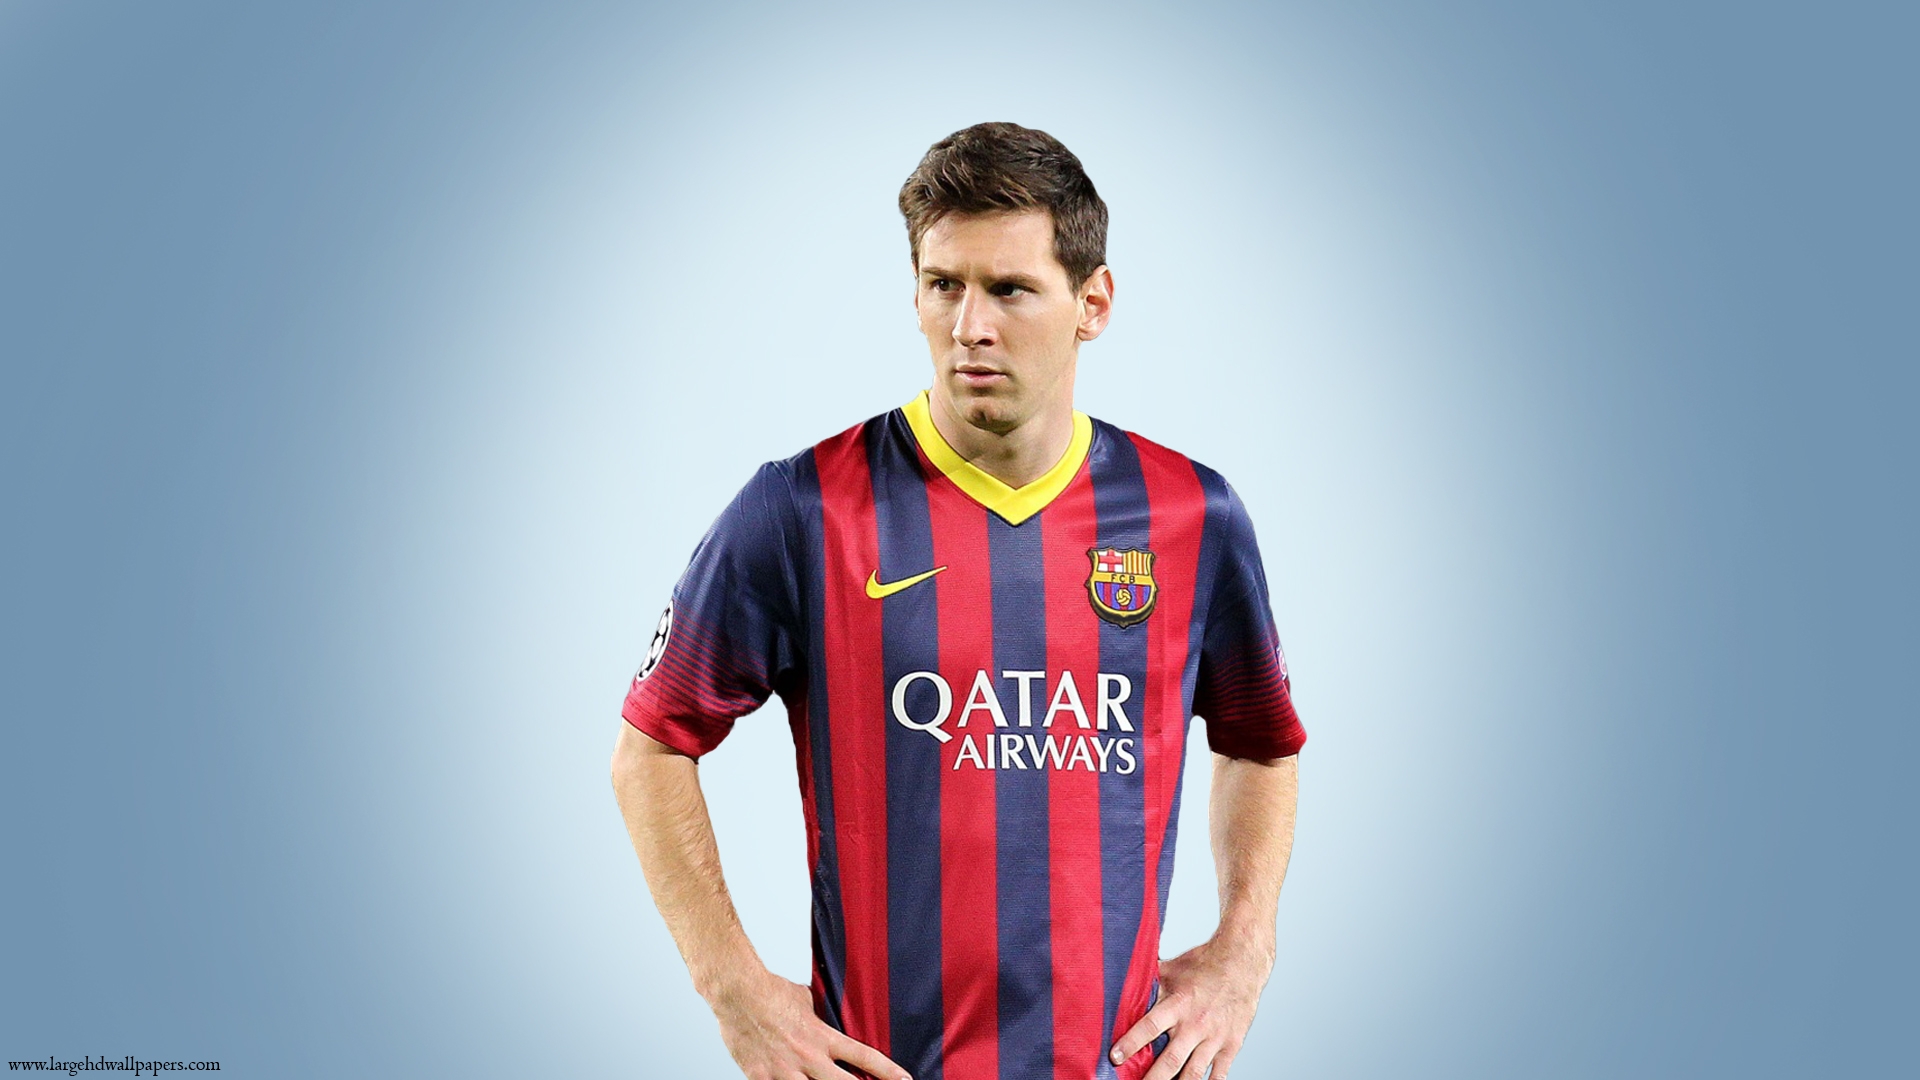 Messi Hd Wallpapers For Iphone 6 - Player - HD Wallpaper 